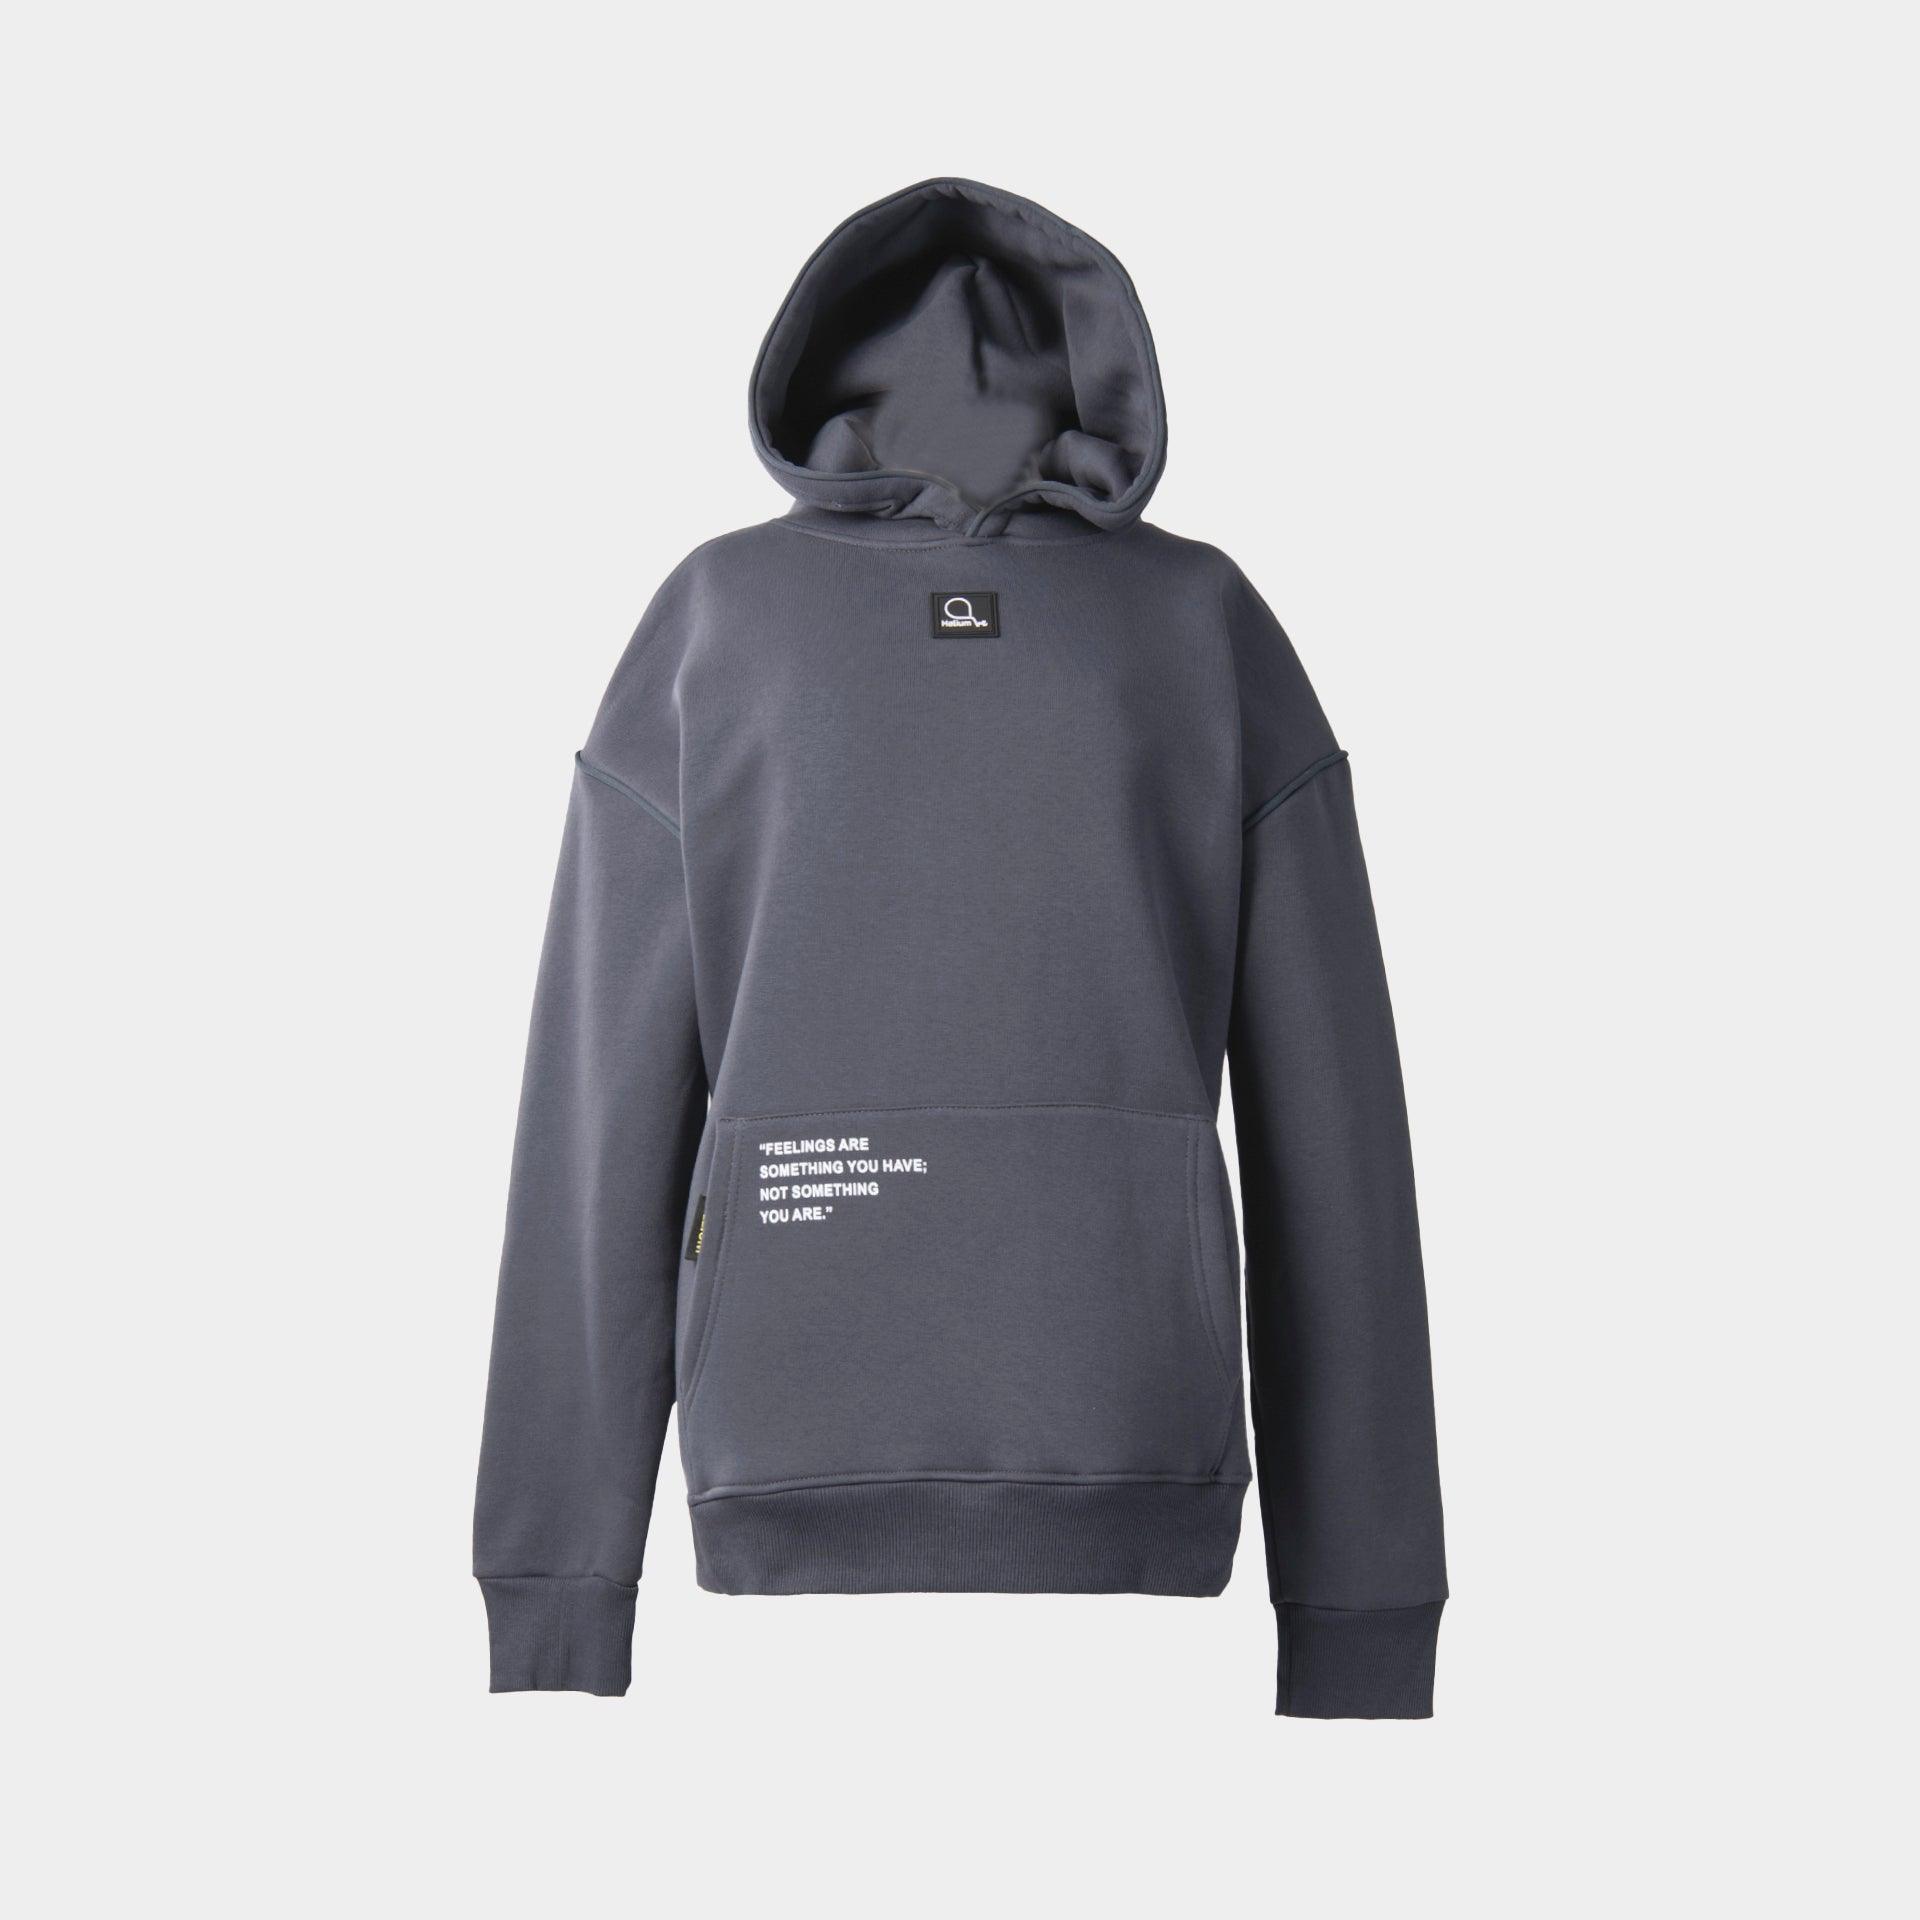 Gray Hoodie From Helium - WECRE8